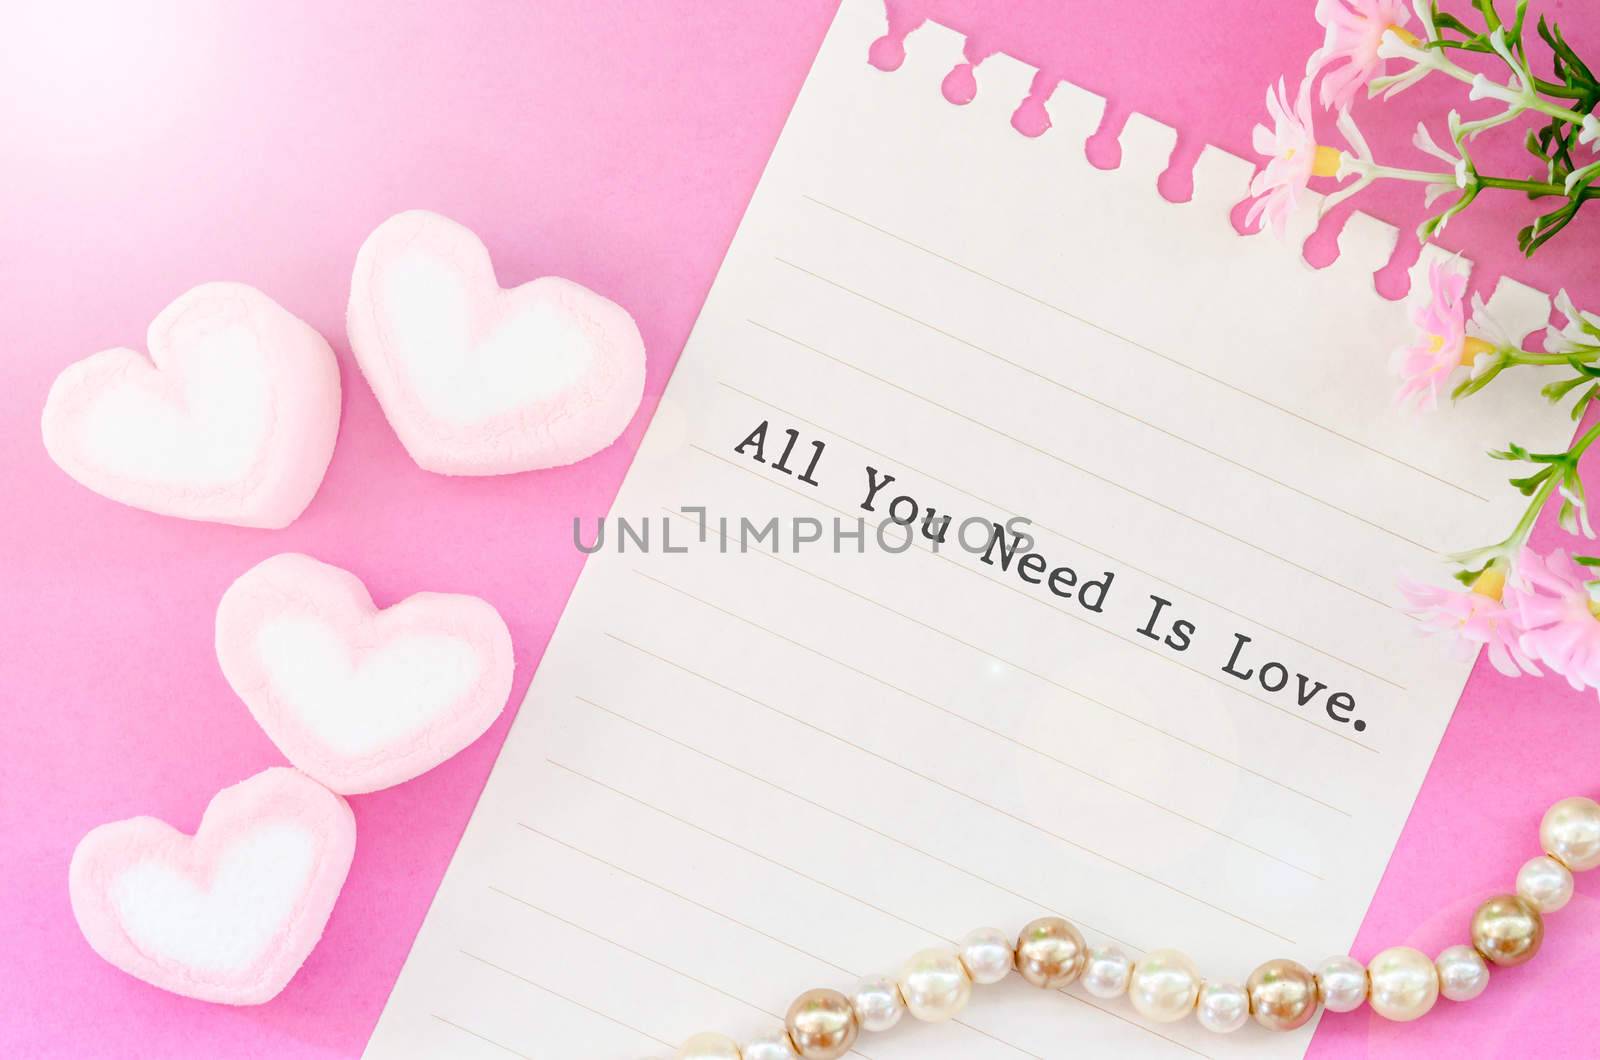 All you need is love with sweet heart shape of pink marshmallows with flower on pink background.